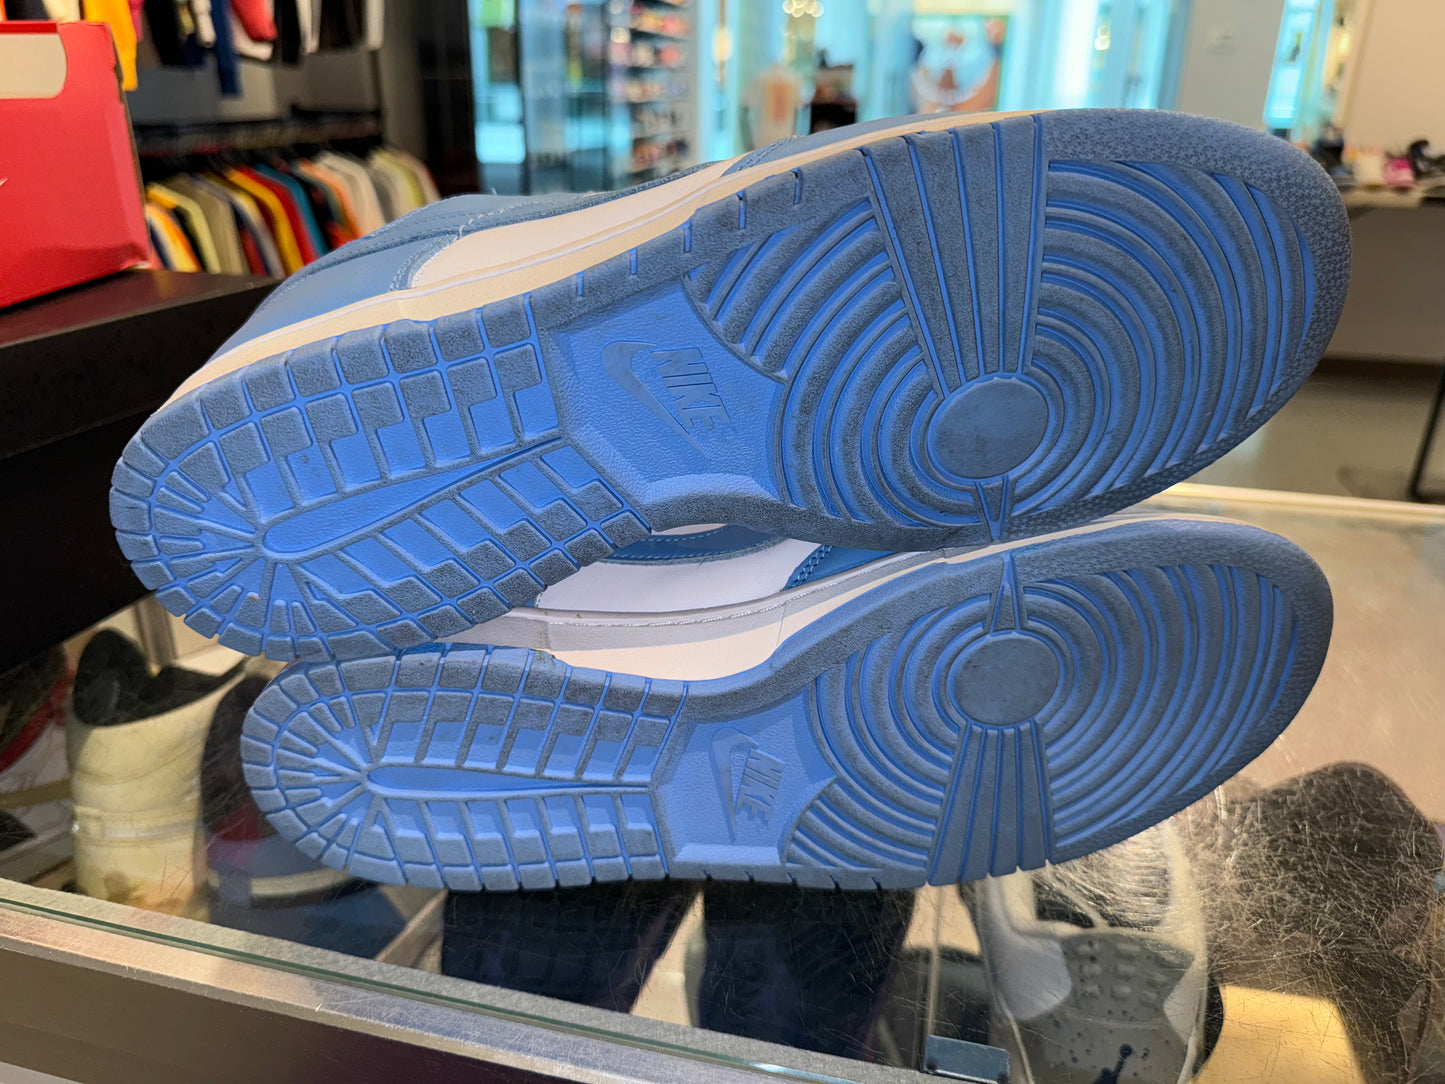 Size 13 Dunk Low “UNC” (Mall)